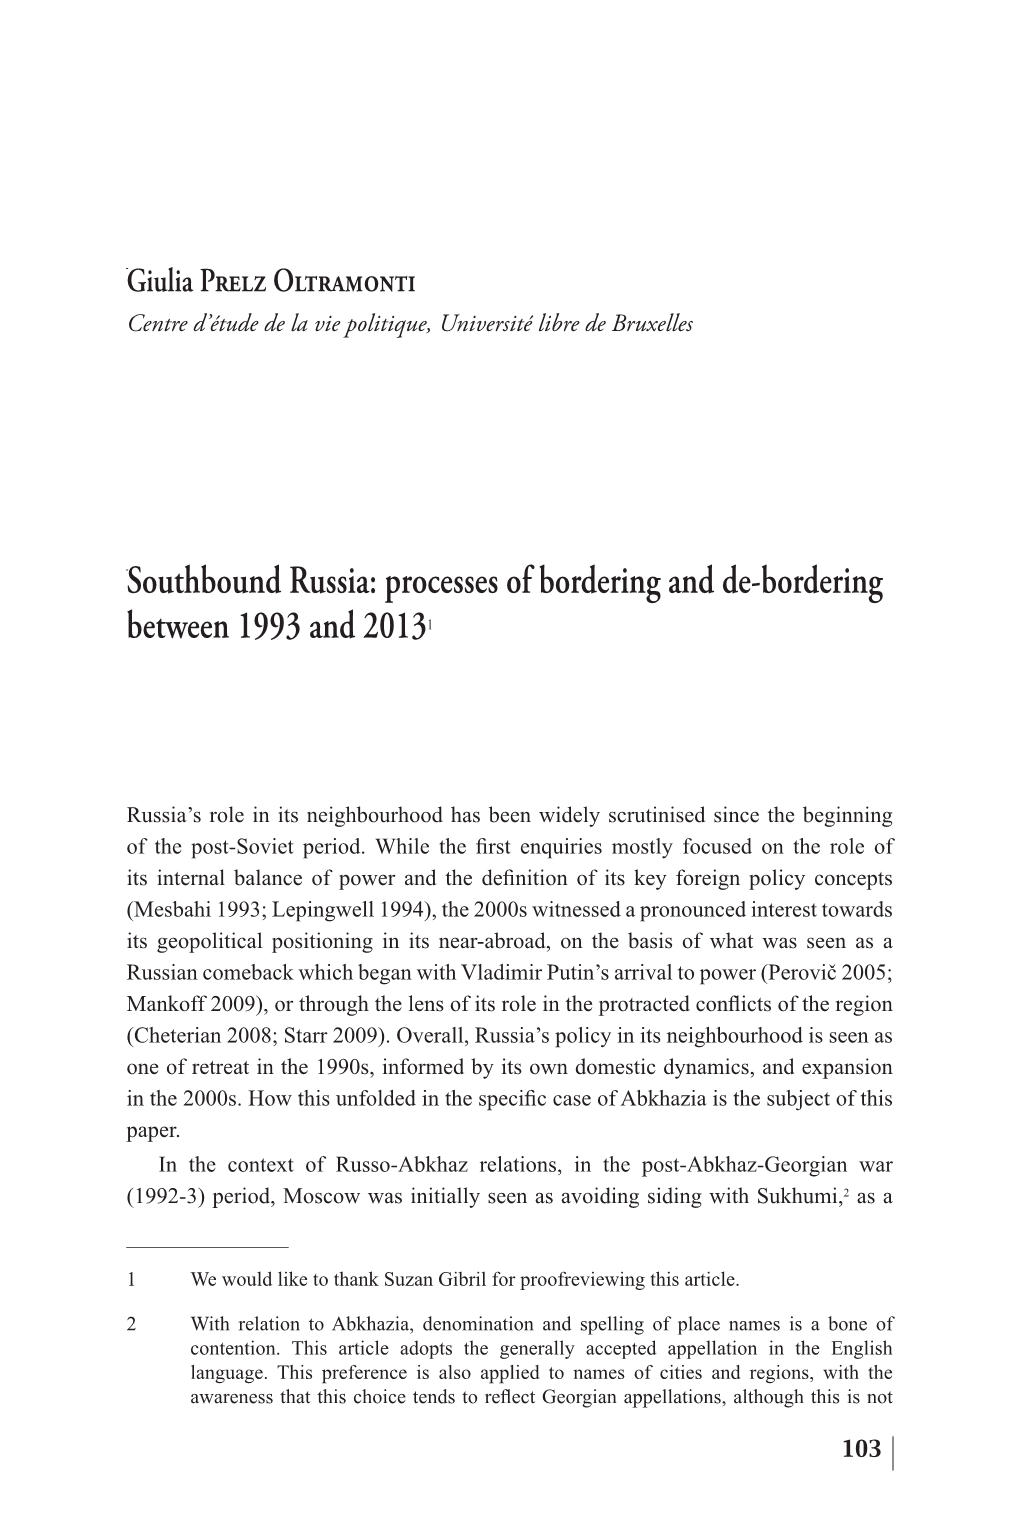 Southbound Russia: Processes of Bordering and De-Bordering Between 1993 and 20131